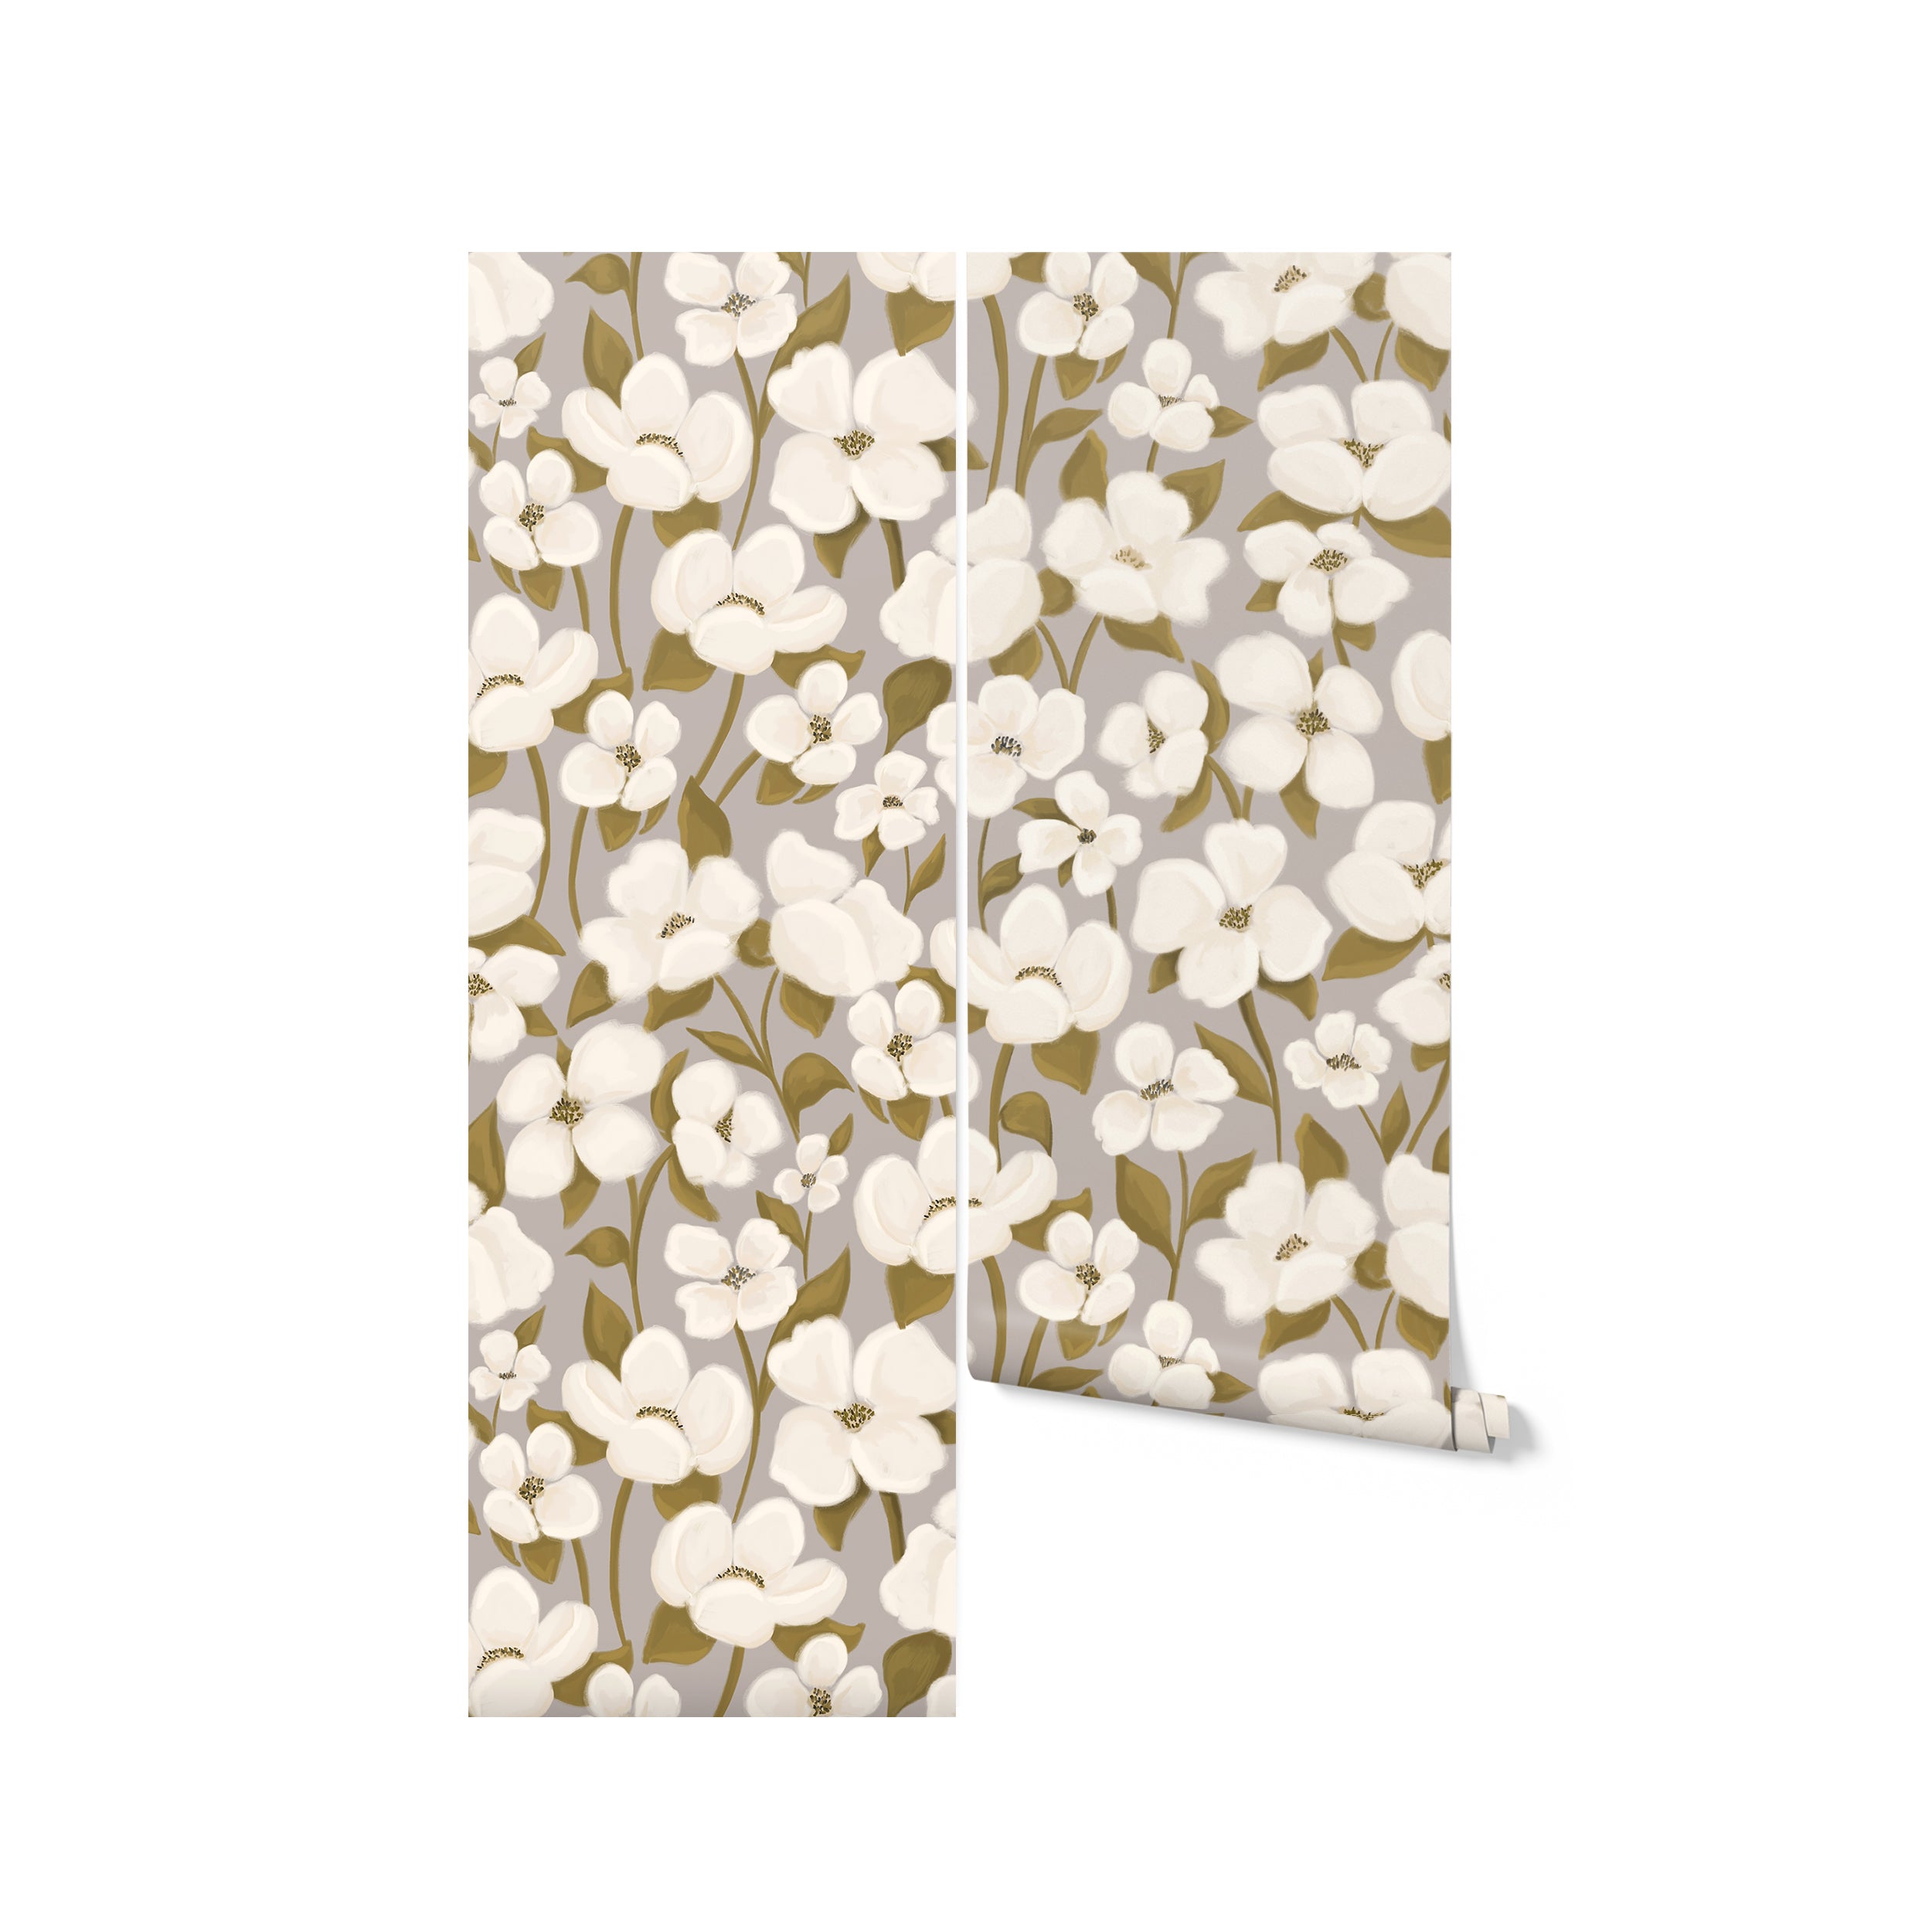 Roll of White Fleur Wallpaper - 50" showing the floral pattern with white flowers and green leaves on a light gray background. The design is perfect for creating a timeless and stylish look in any room.